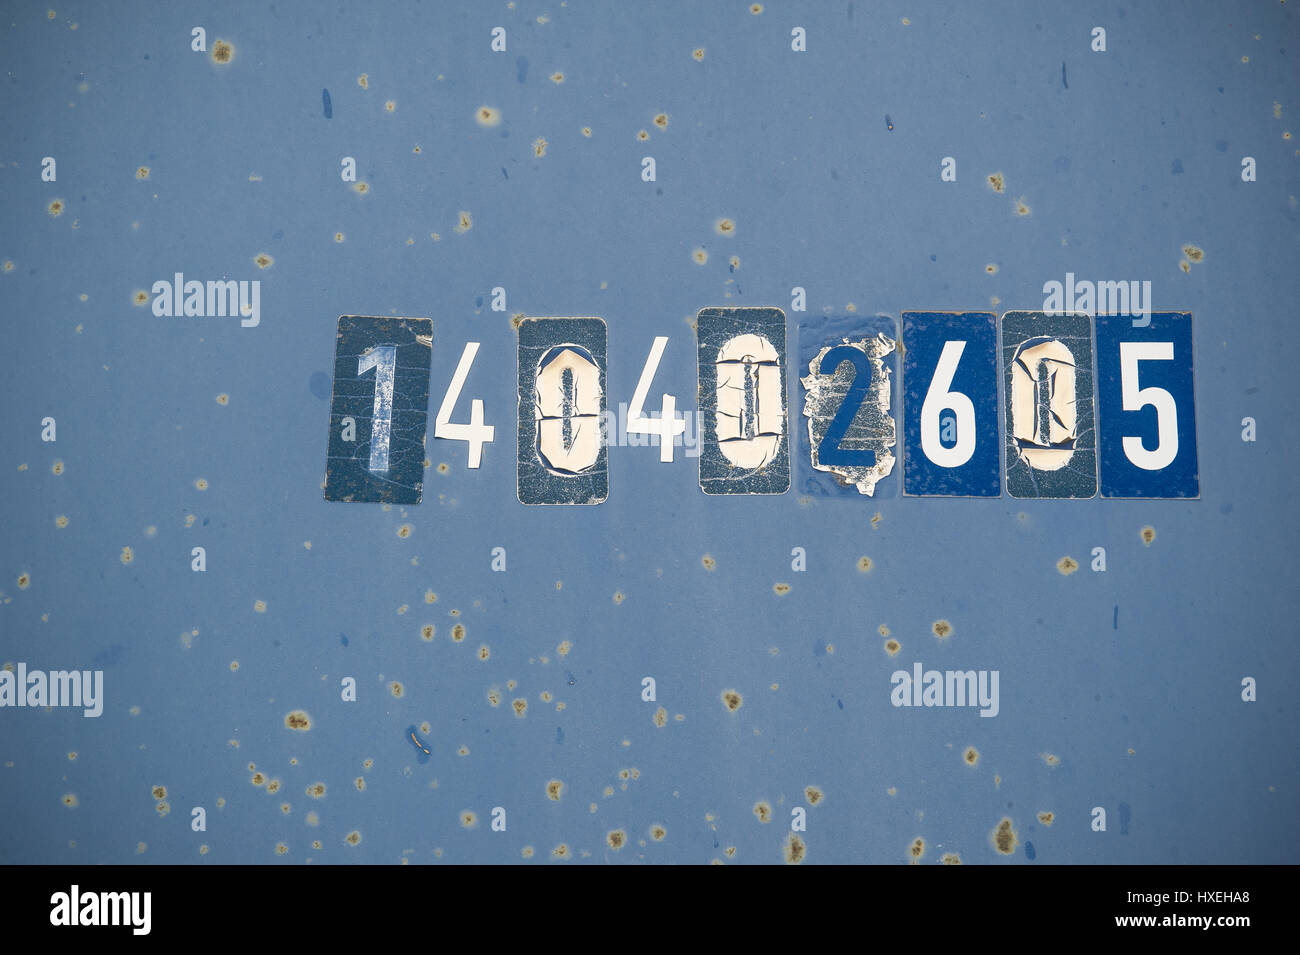 numbers on a blue rusty container background Stock Photo